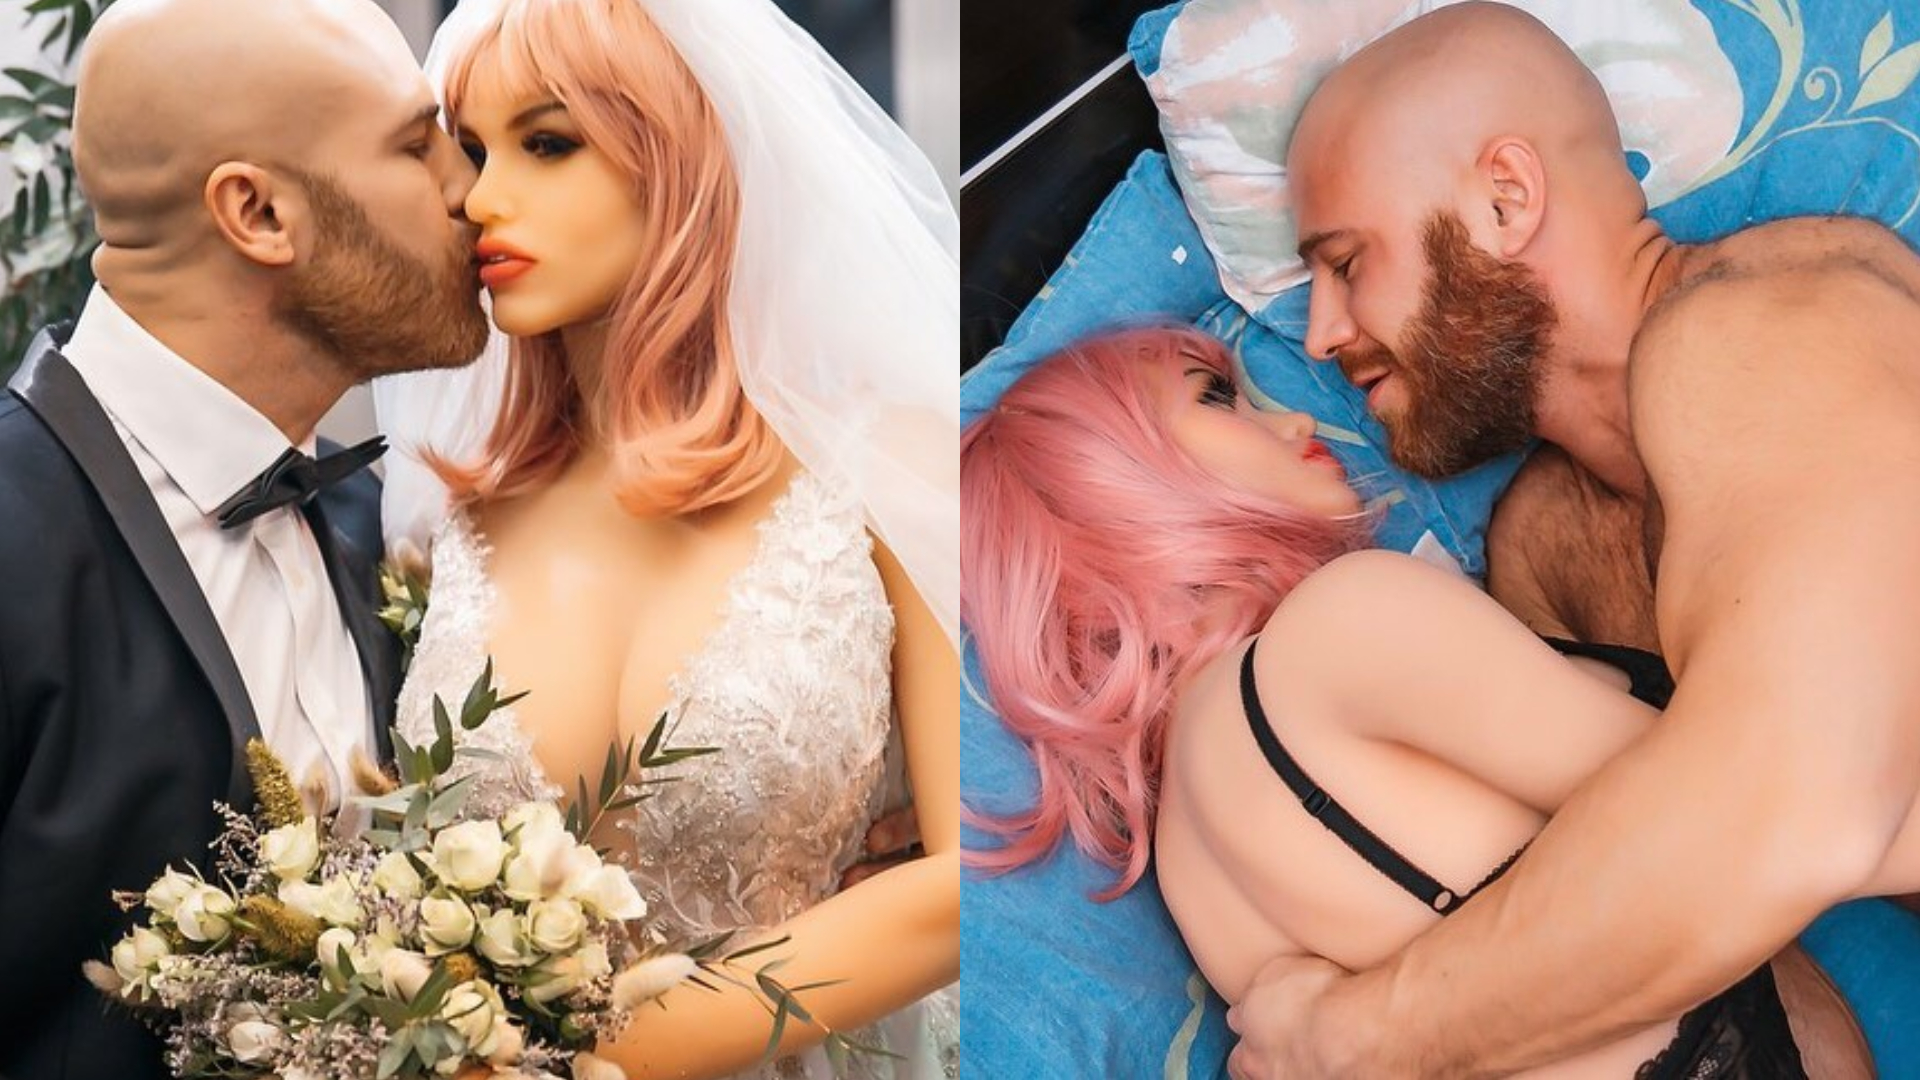 Meet the Man Who Married His Sex Doll photo image